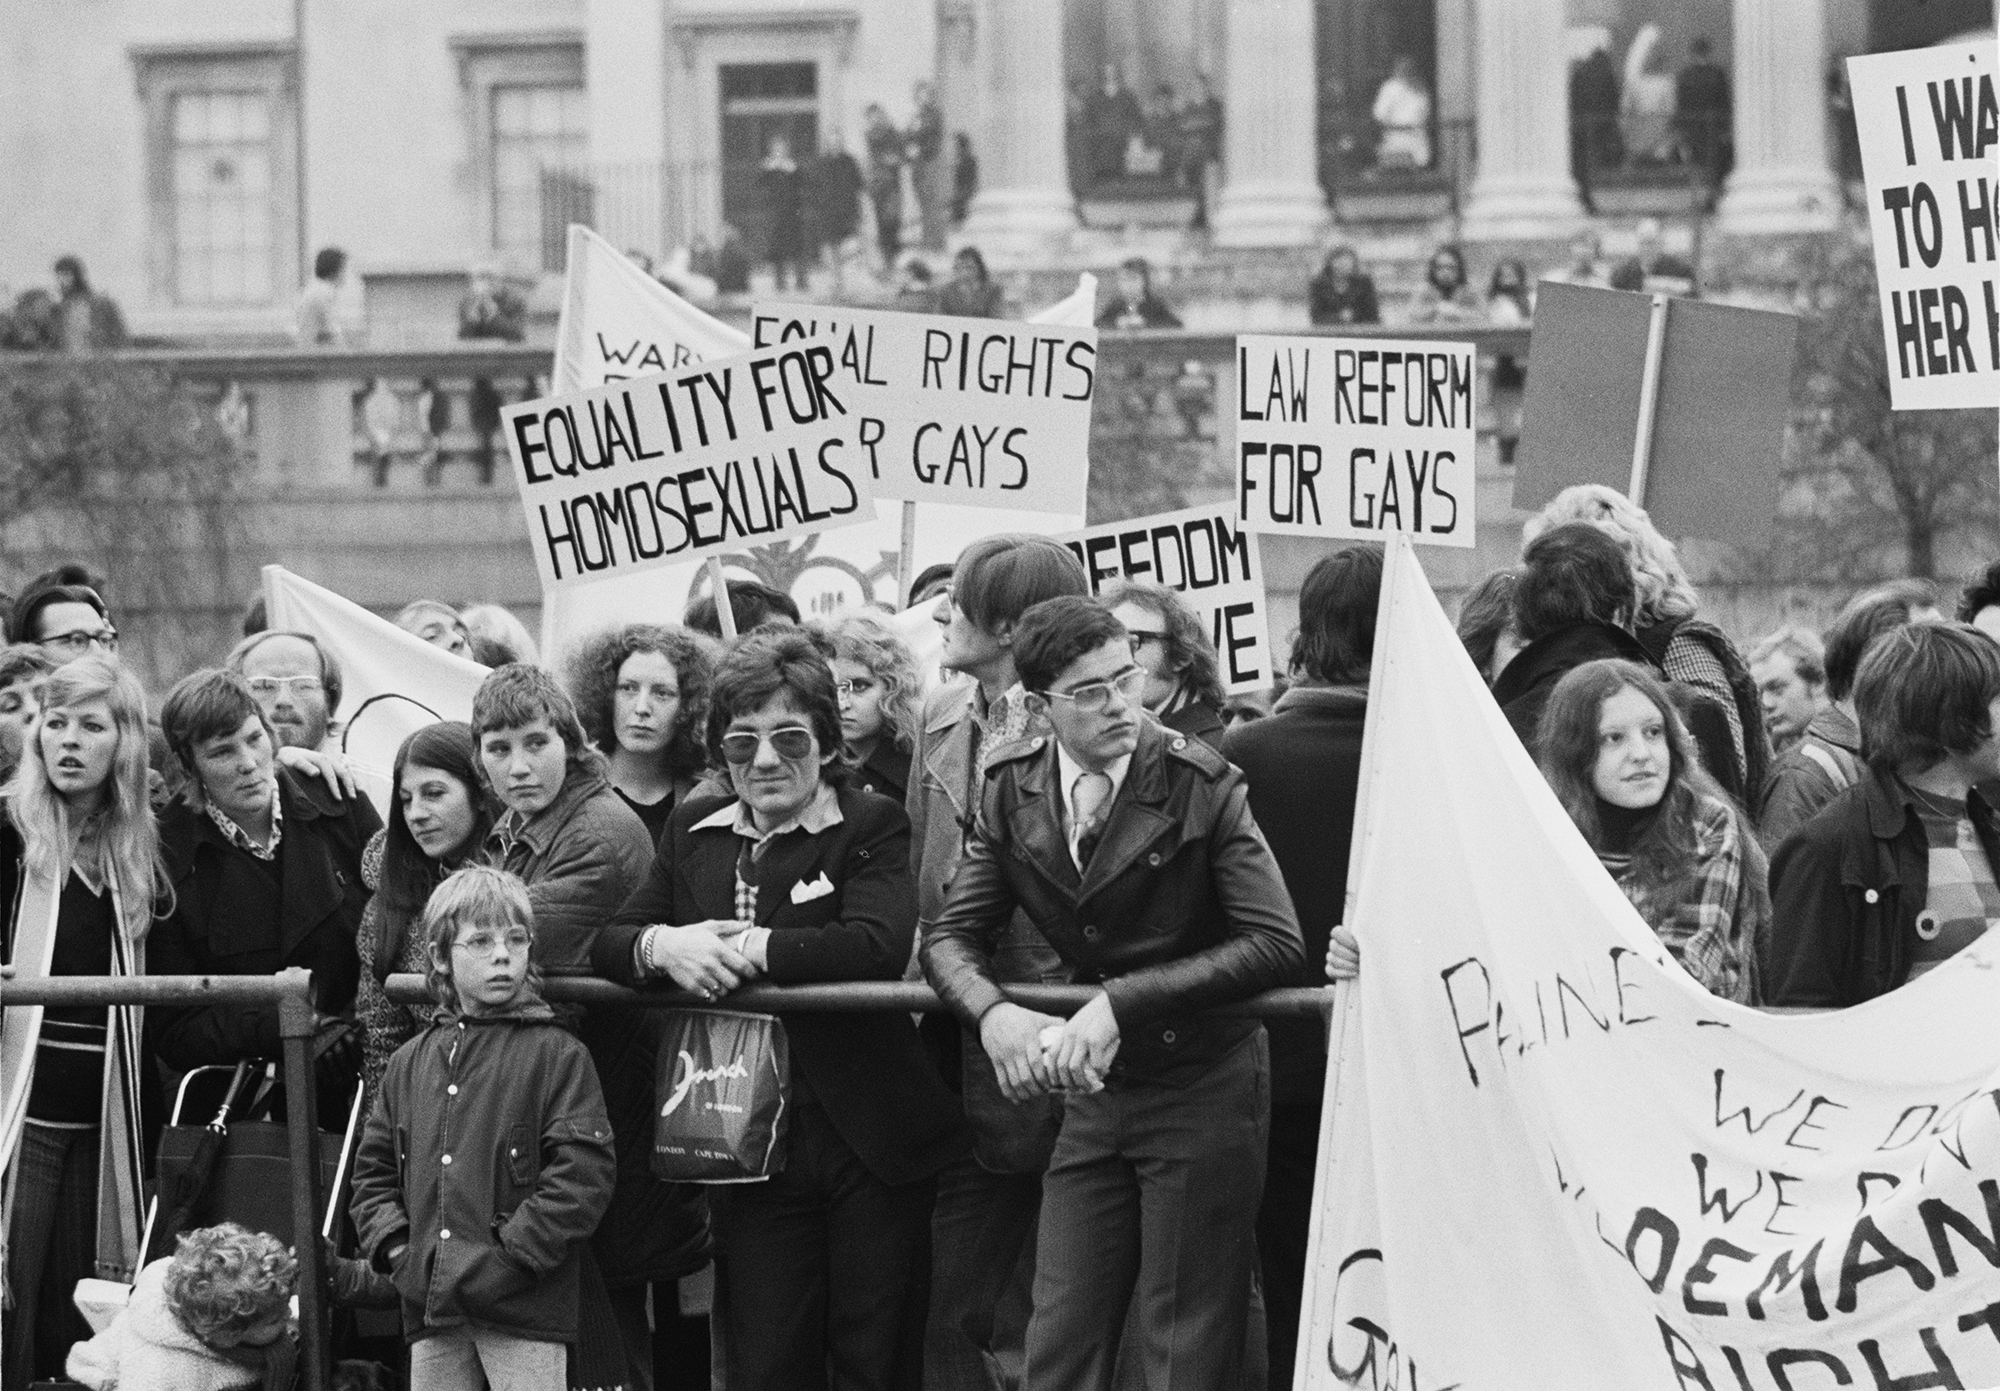 Demonstrators in Trafalgar Square at a rally organized by the Campaign for Homosexual Equality in  London on November 2, 1974